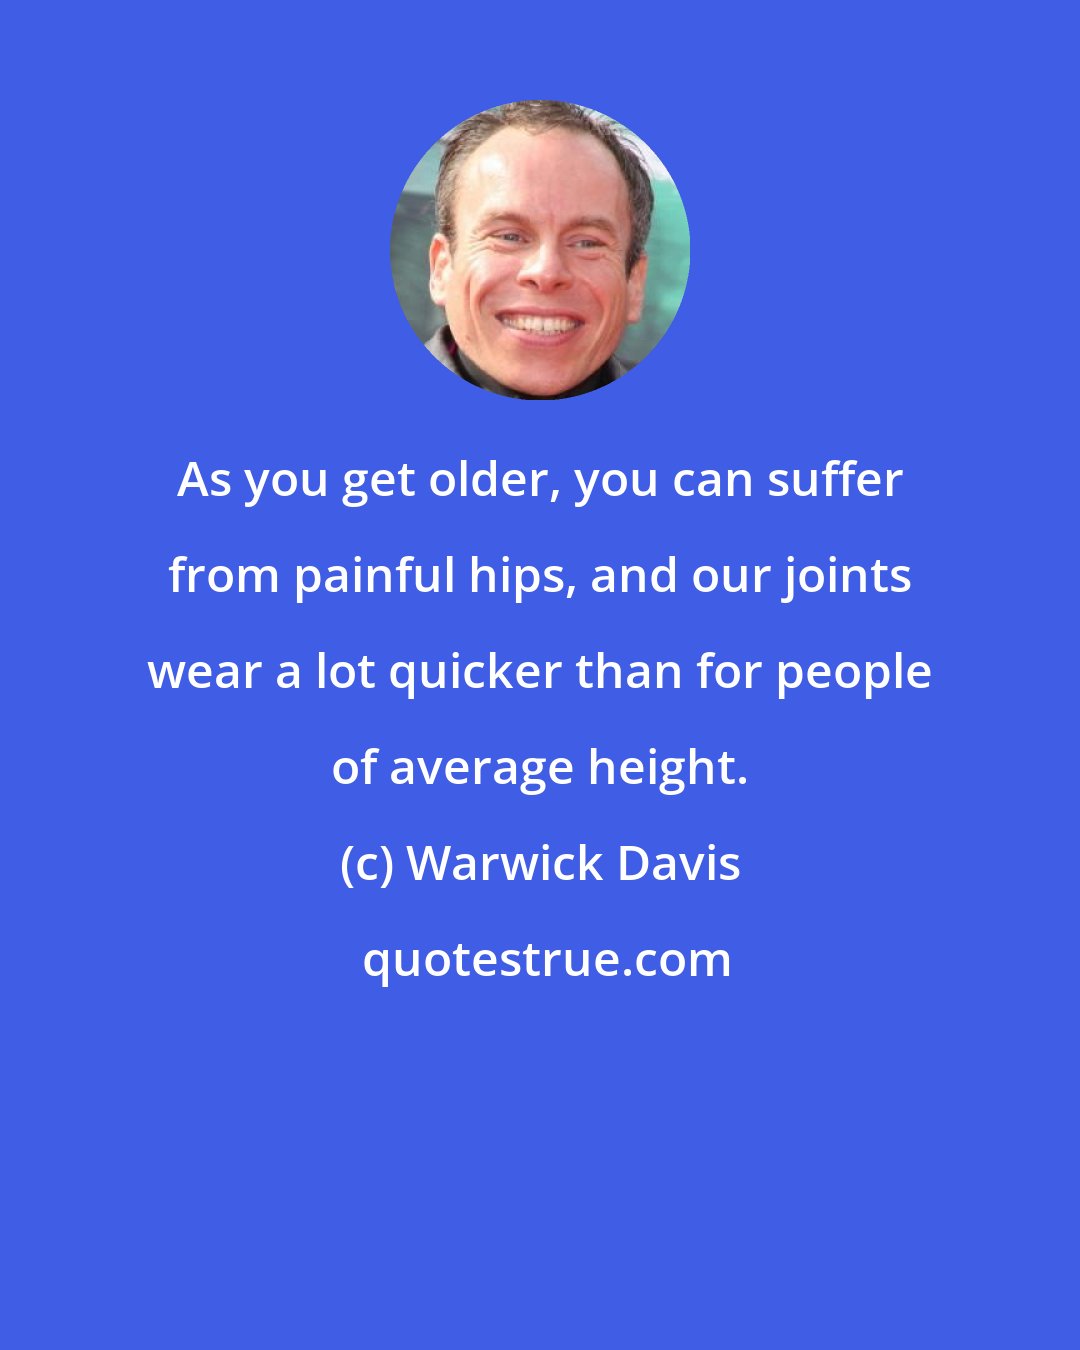 Warwick Davis: As you get older, you can suffer from painful hips, and our joints wear a lot quicker than for people of average height.